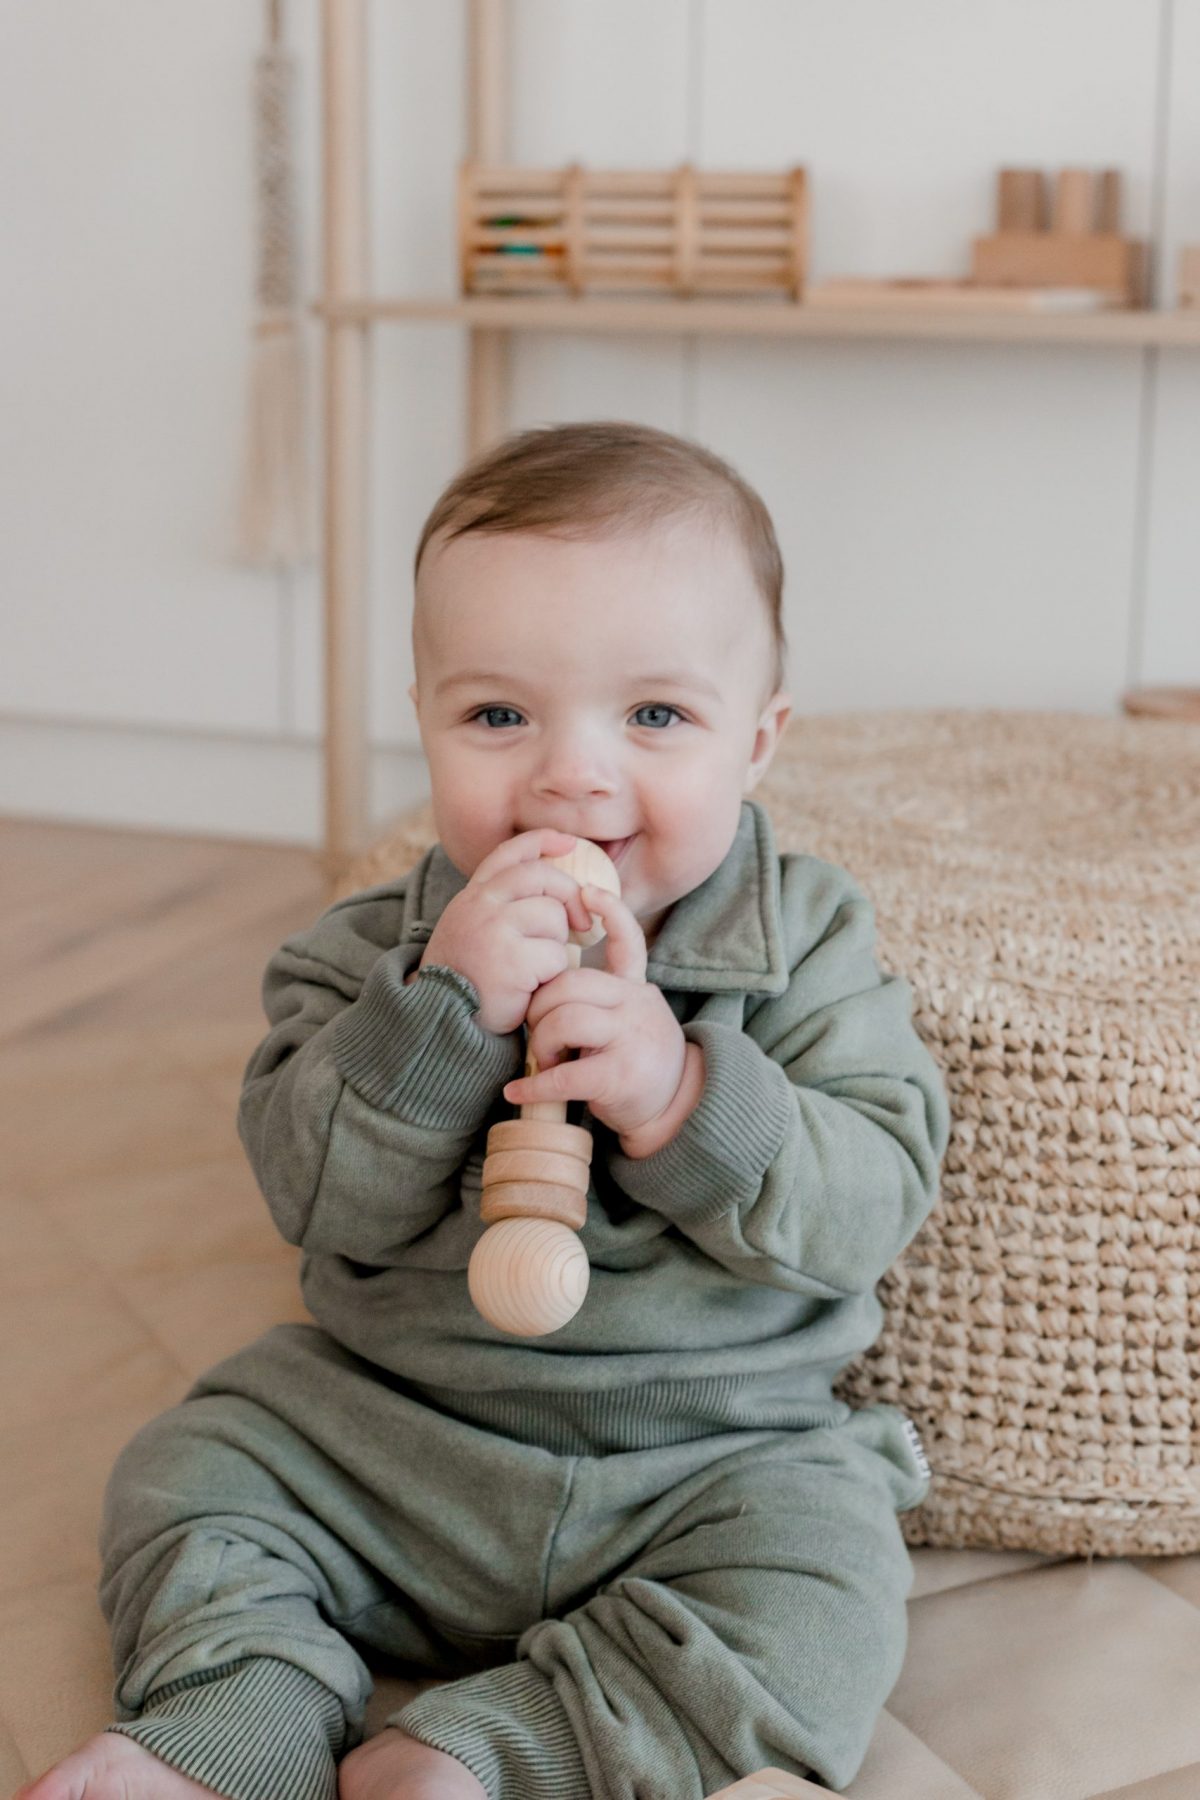 Grasping Rattle - Qtoys - Learning through Play